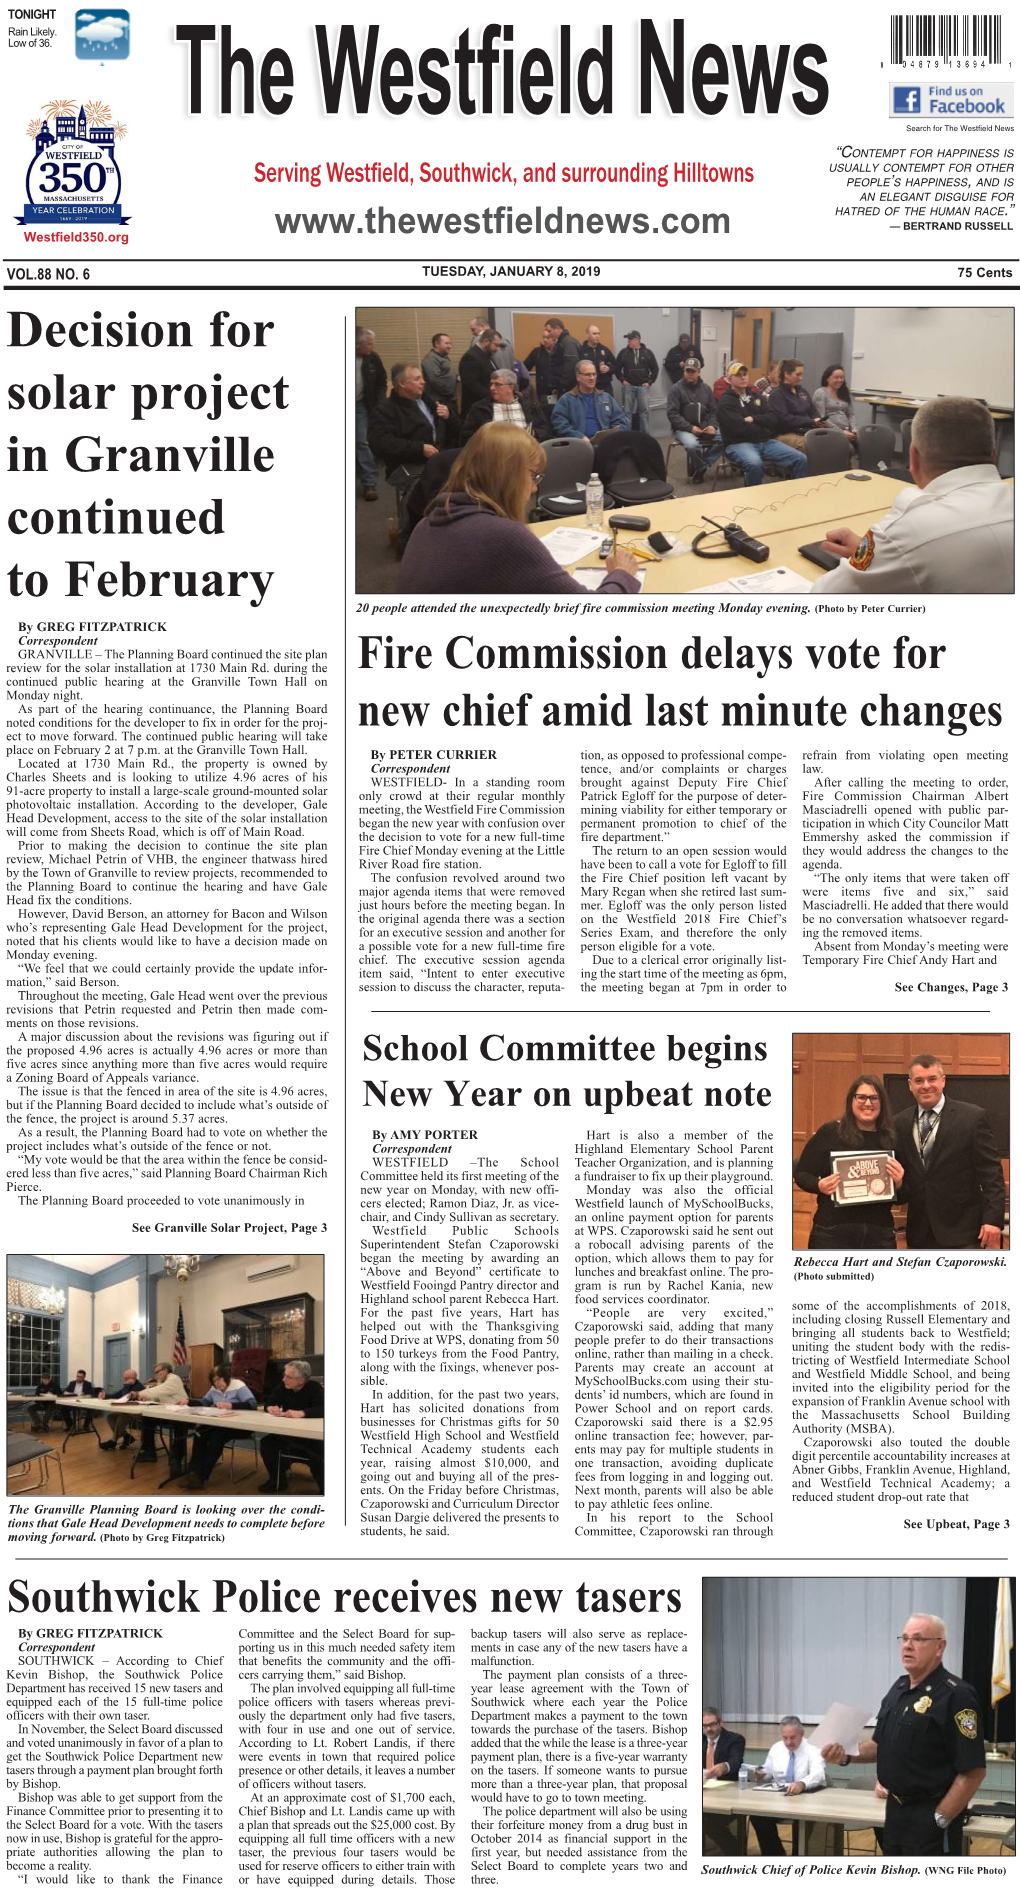 Decision for Solar Project in Granville Continued to February